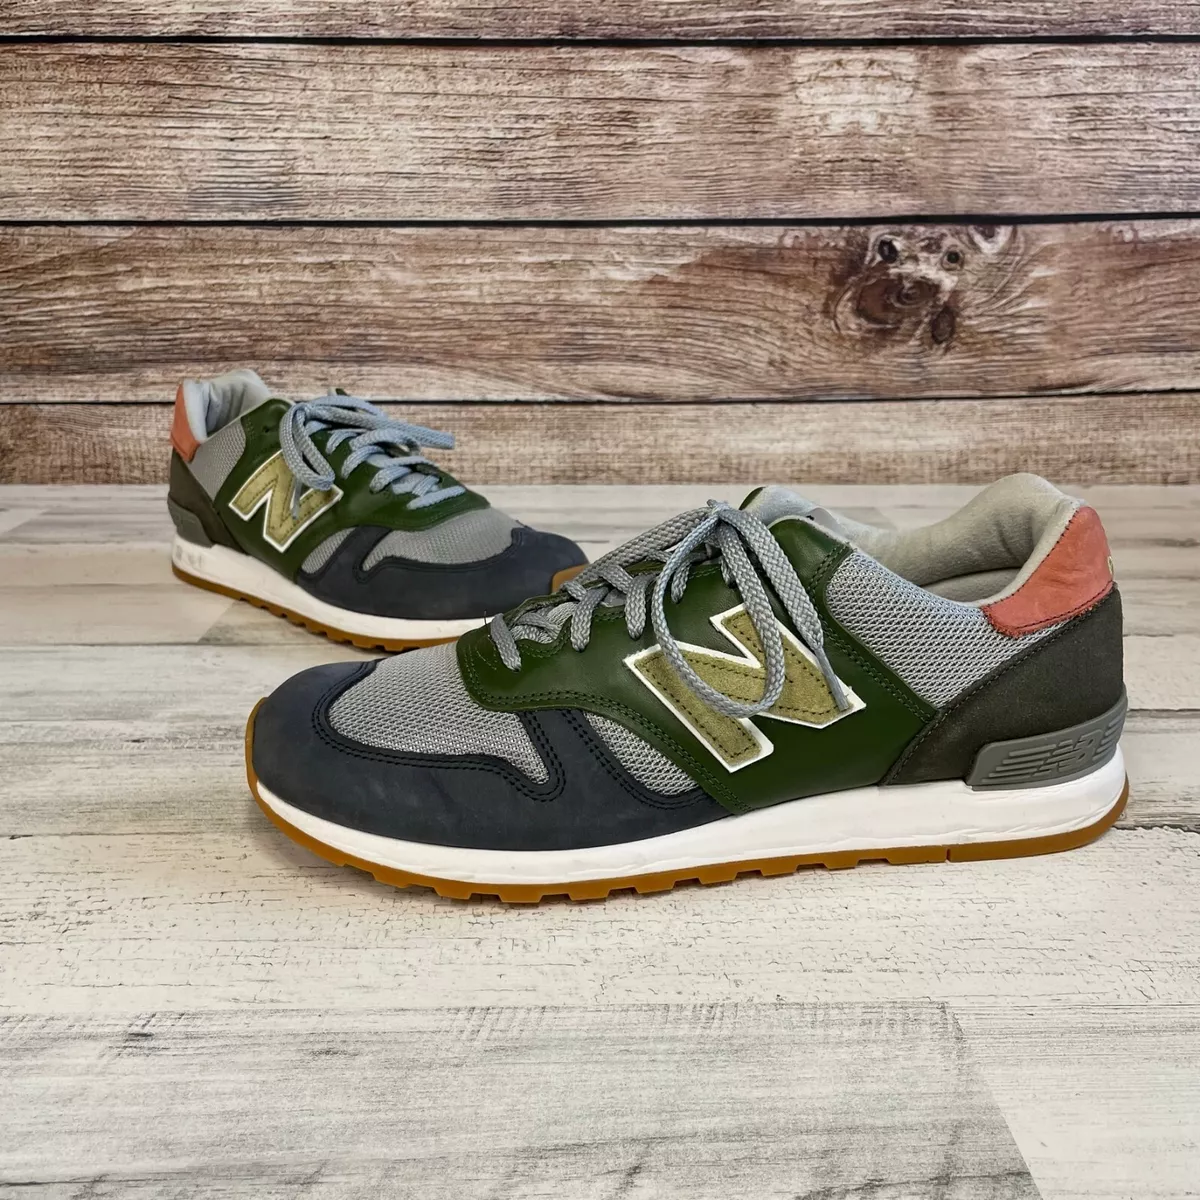 pak salade Vooruitzien New Balance 670 Made in England Size 11.5 Selected Edition M670SPK | eBay